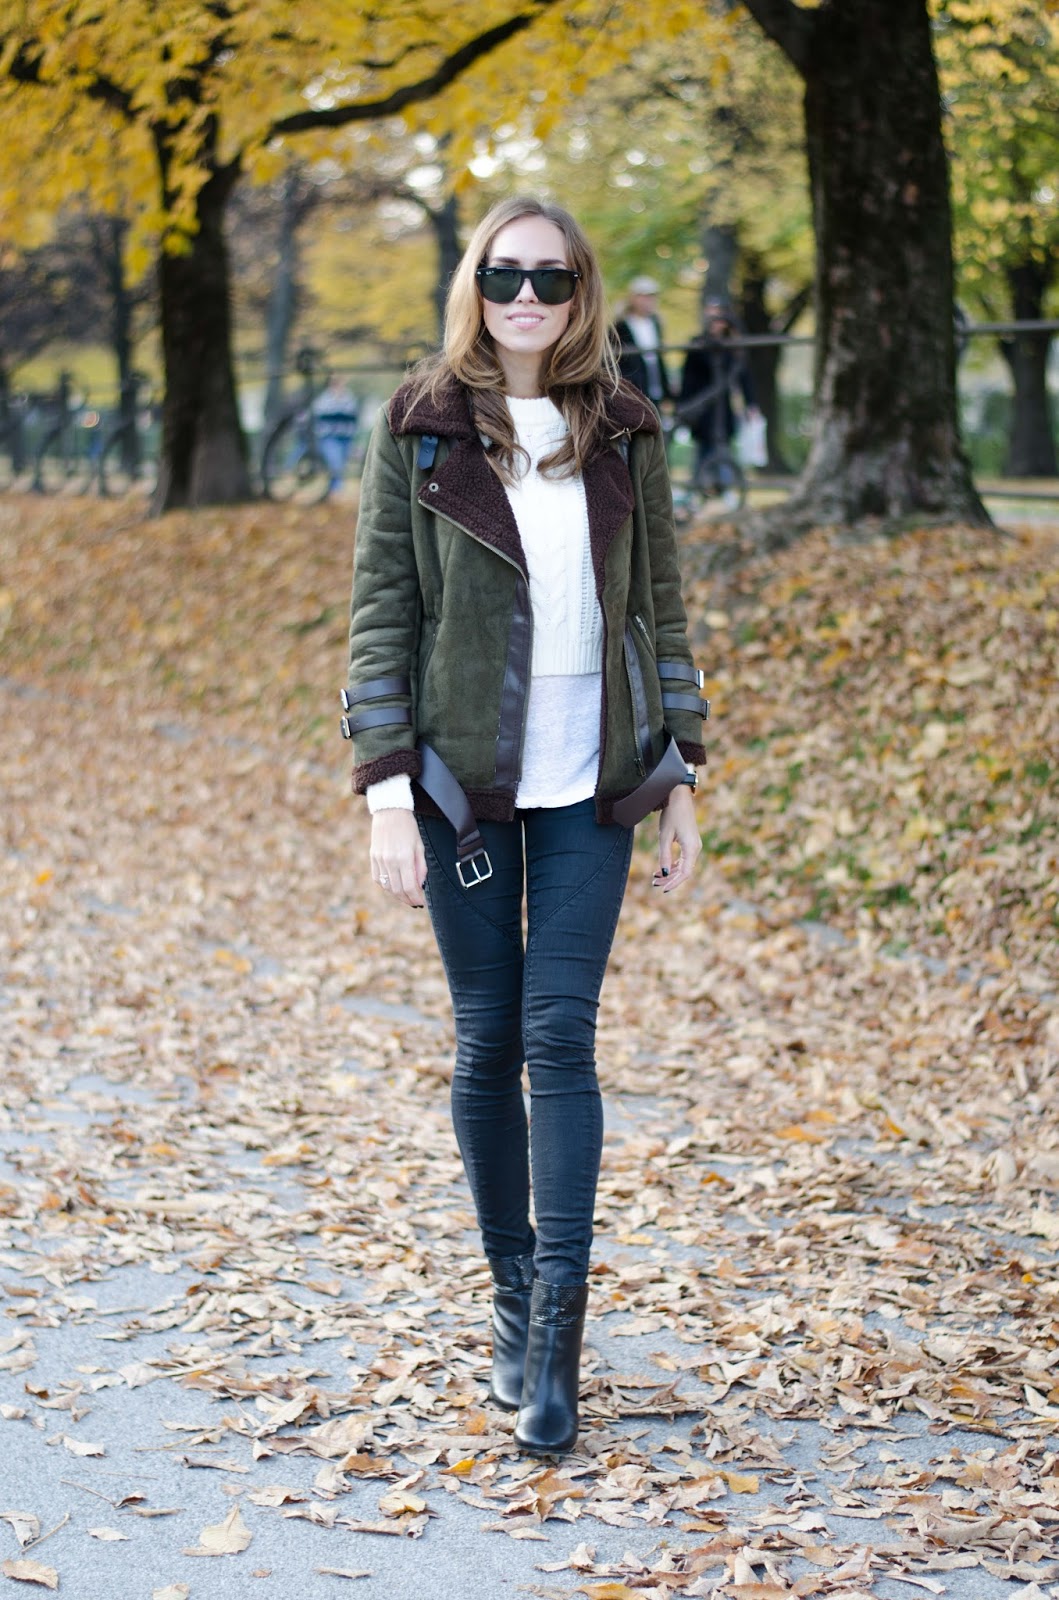 kristjaana mere green brown shearling jacket black skinny jeans ankle boots fall outfit fashion